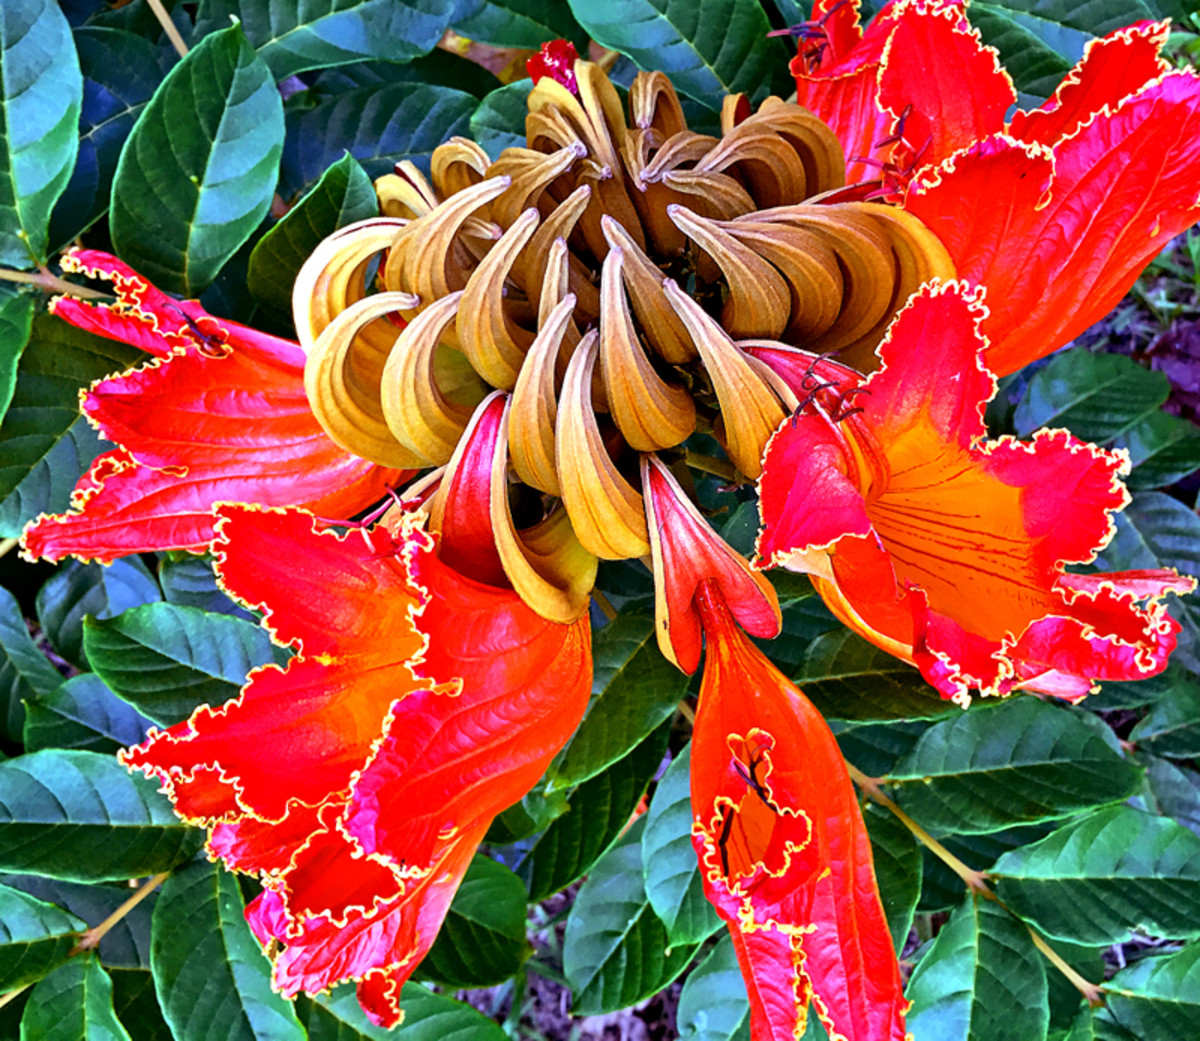 The stunning African Tulip Tree is widespread in most low-elevation rainforests of Hawaii.